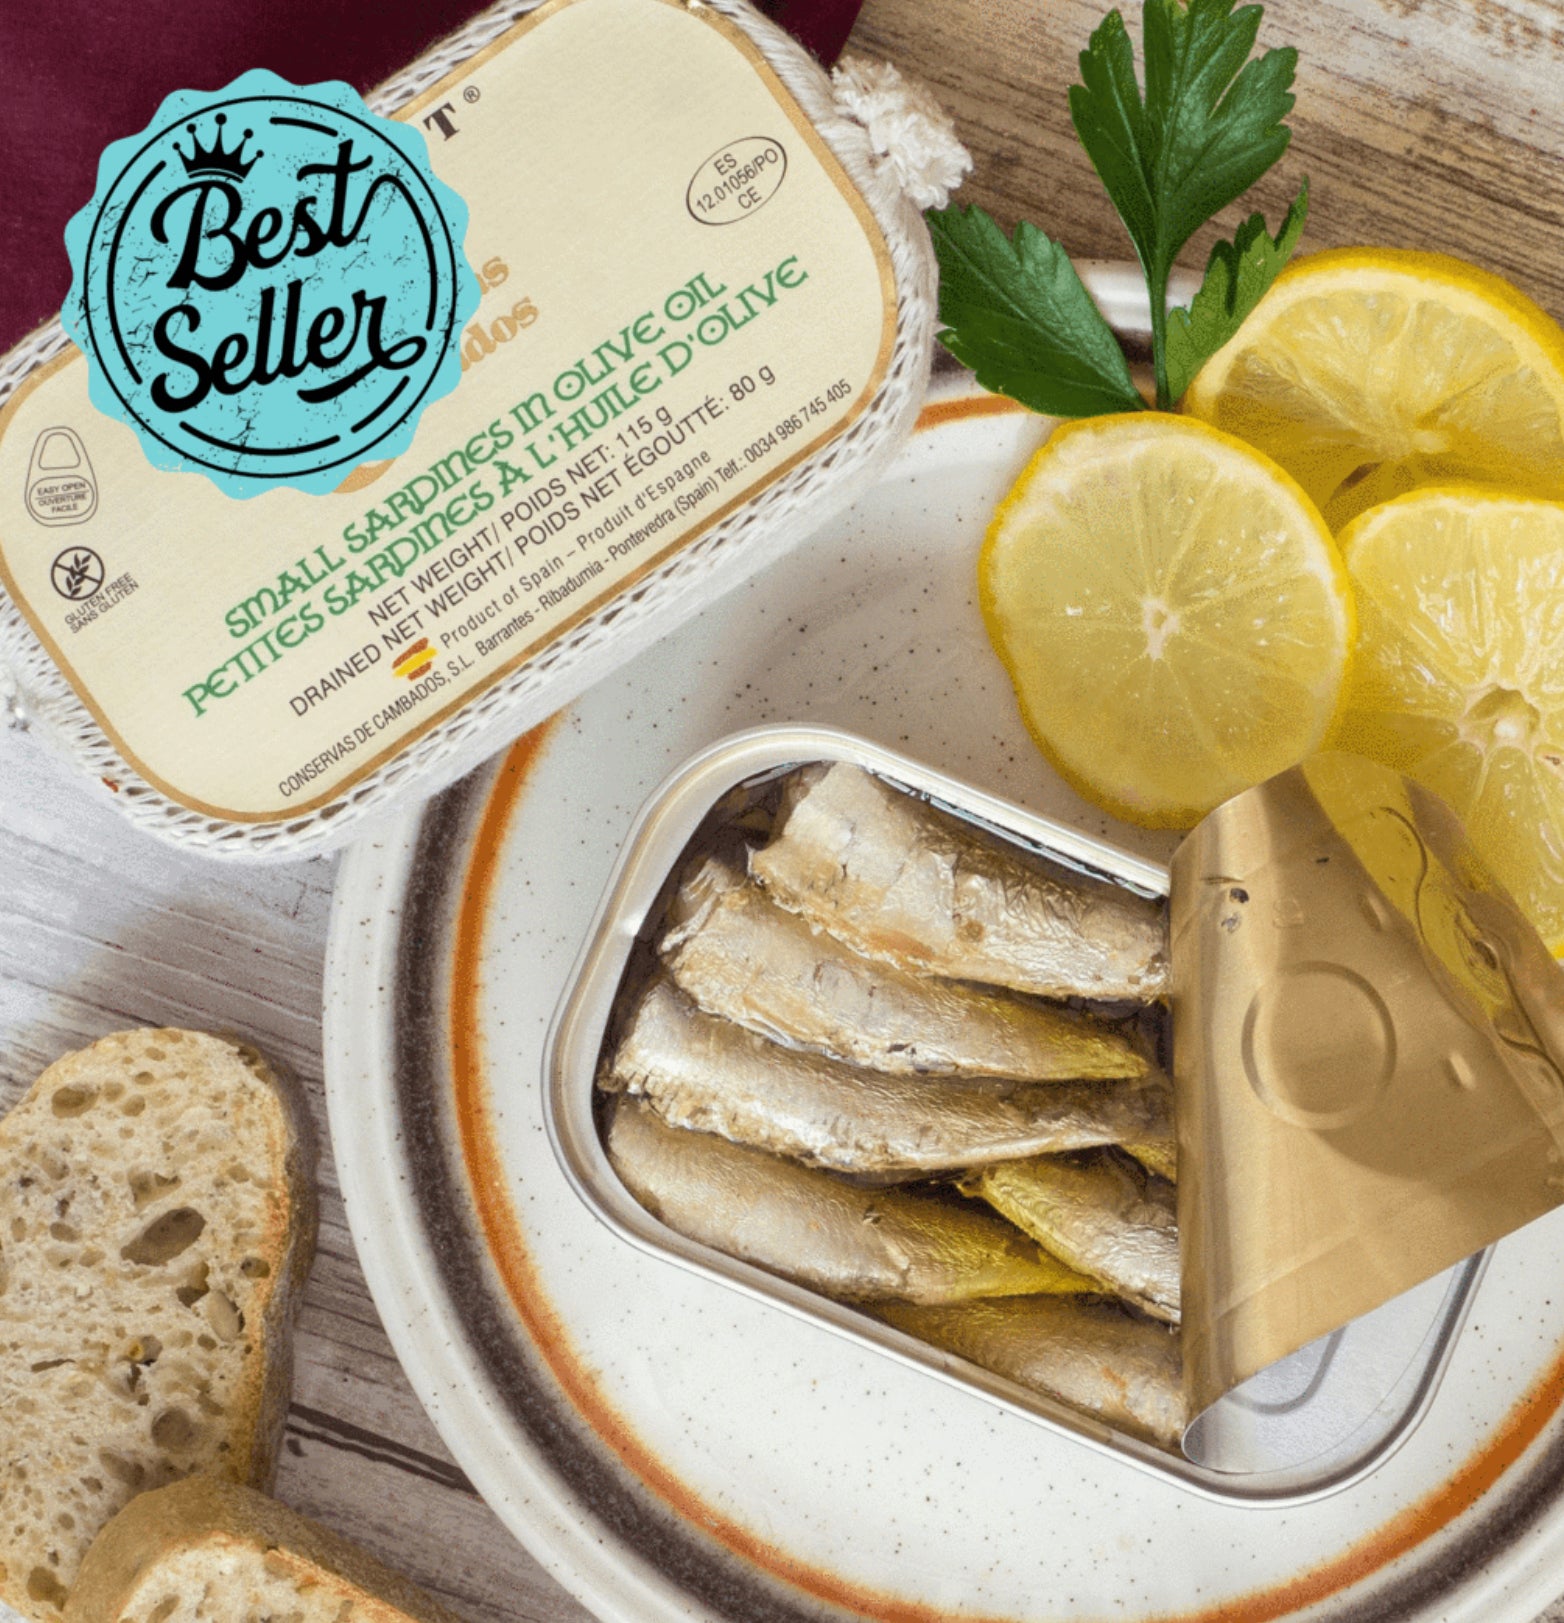 Gourmet small sardines in olive oil